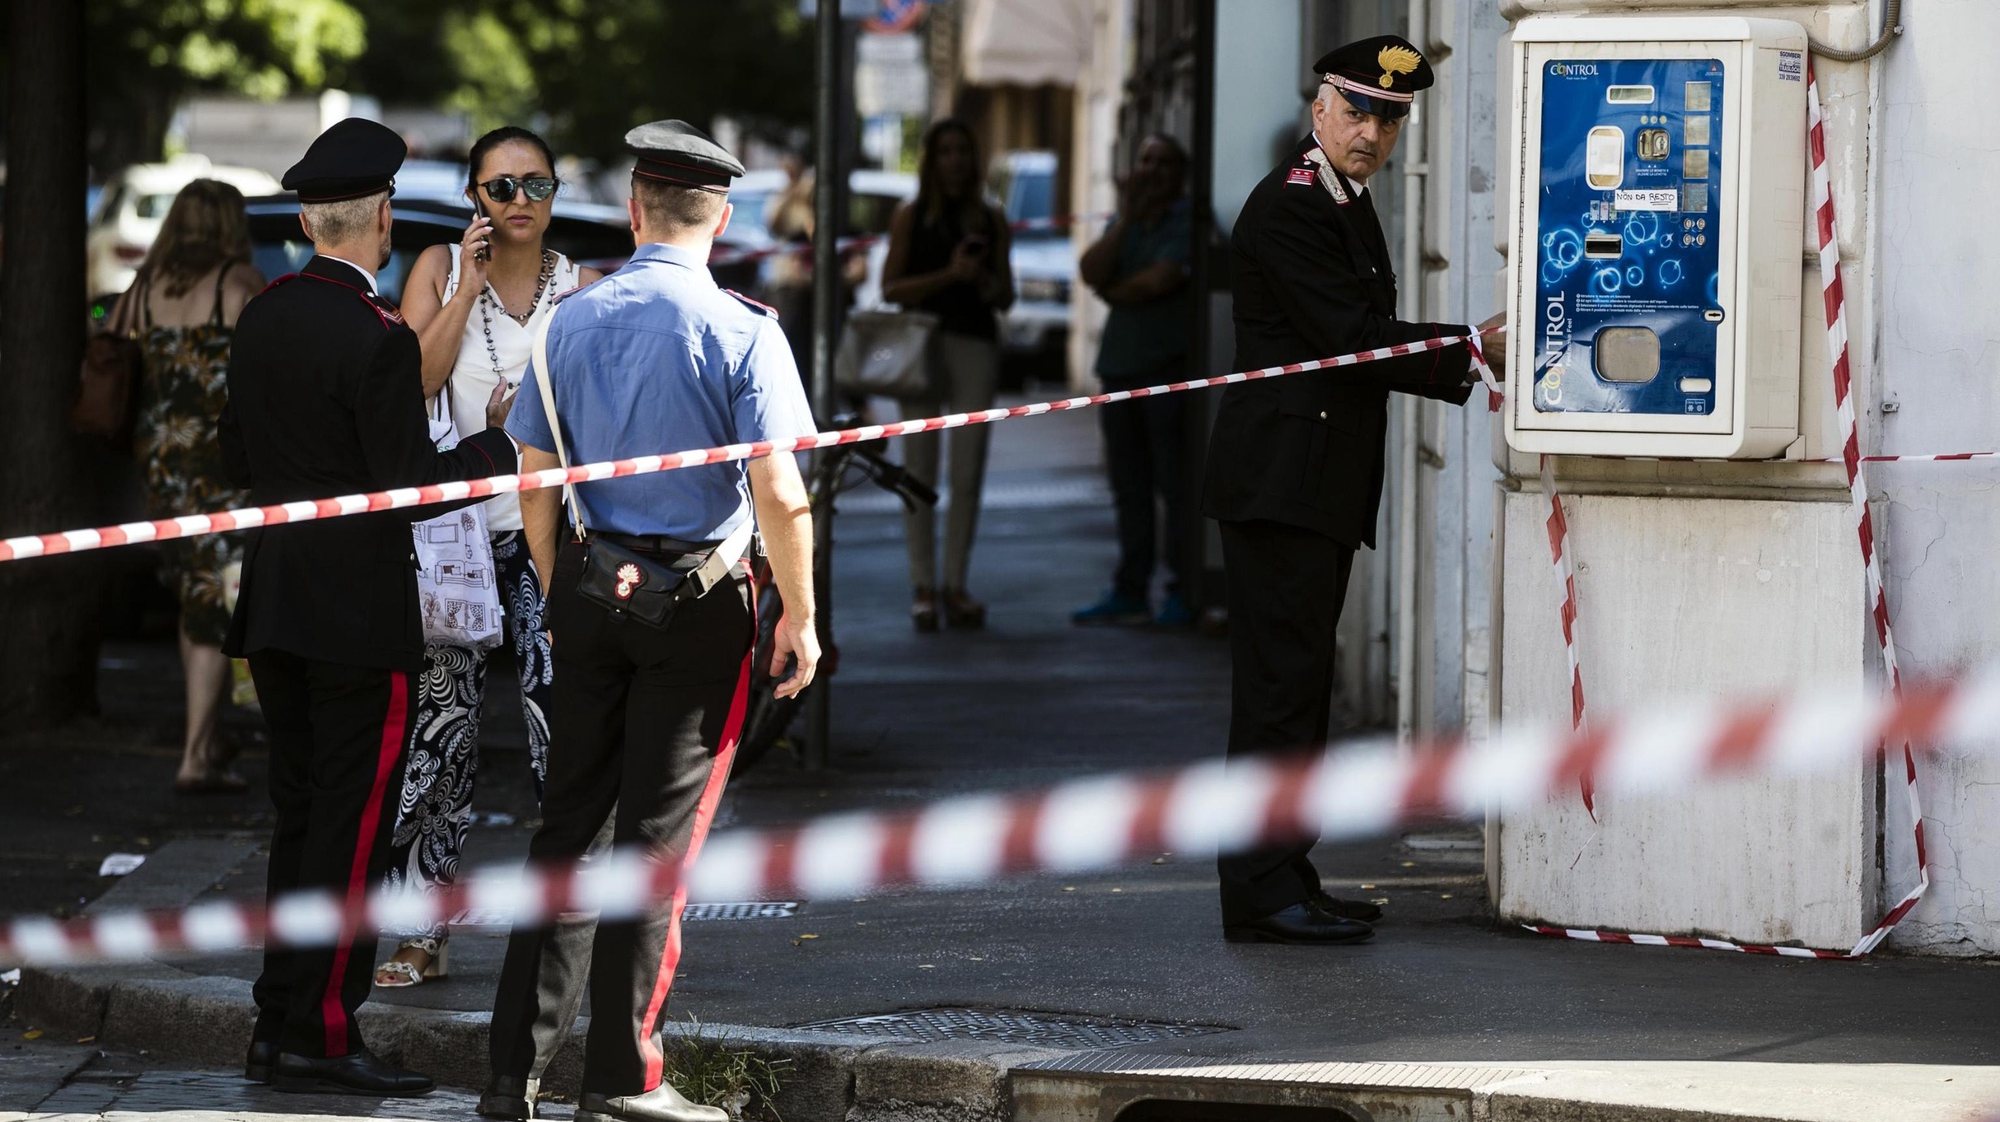 epa09180033 (FILE) - Carabinieri officer and forensic police work a crime scene where Vice Brigadier of Carabinieri Mario Cerciello Rega was shot dead the night before in via Pietro Cossa, Rome, Italy, 26 July 2019 (reissued 06 May 2021). US college students Gabriel Natale-Hjorth and Finnegan Lee Elder were sentenced to life in prison on 05 May 2021 for the 2019 murder of Carabinieri paramilitary police officer Mario Cerciello Rega in Rome.  EPA/ANGELO CARCONI